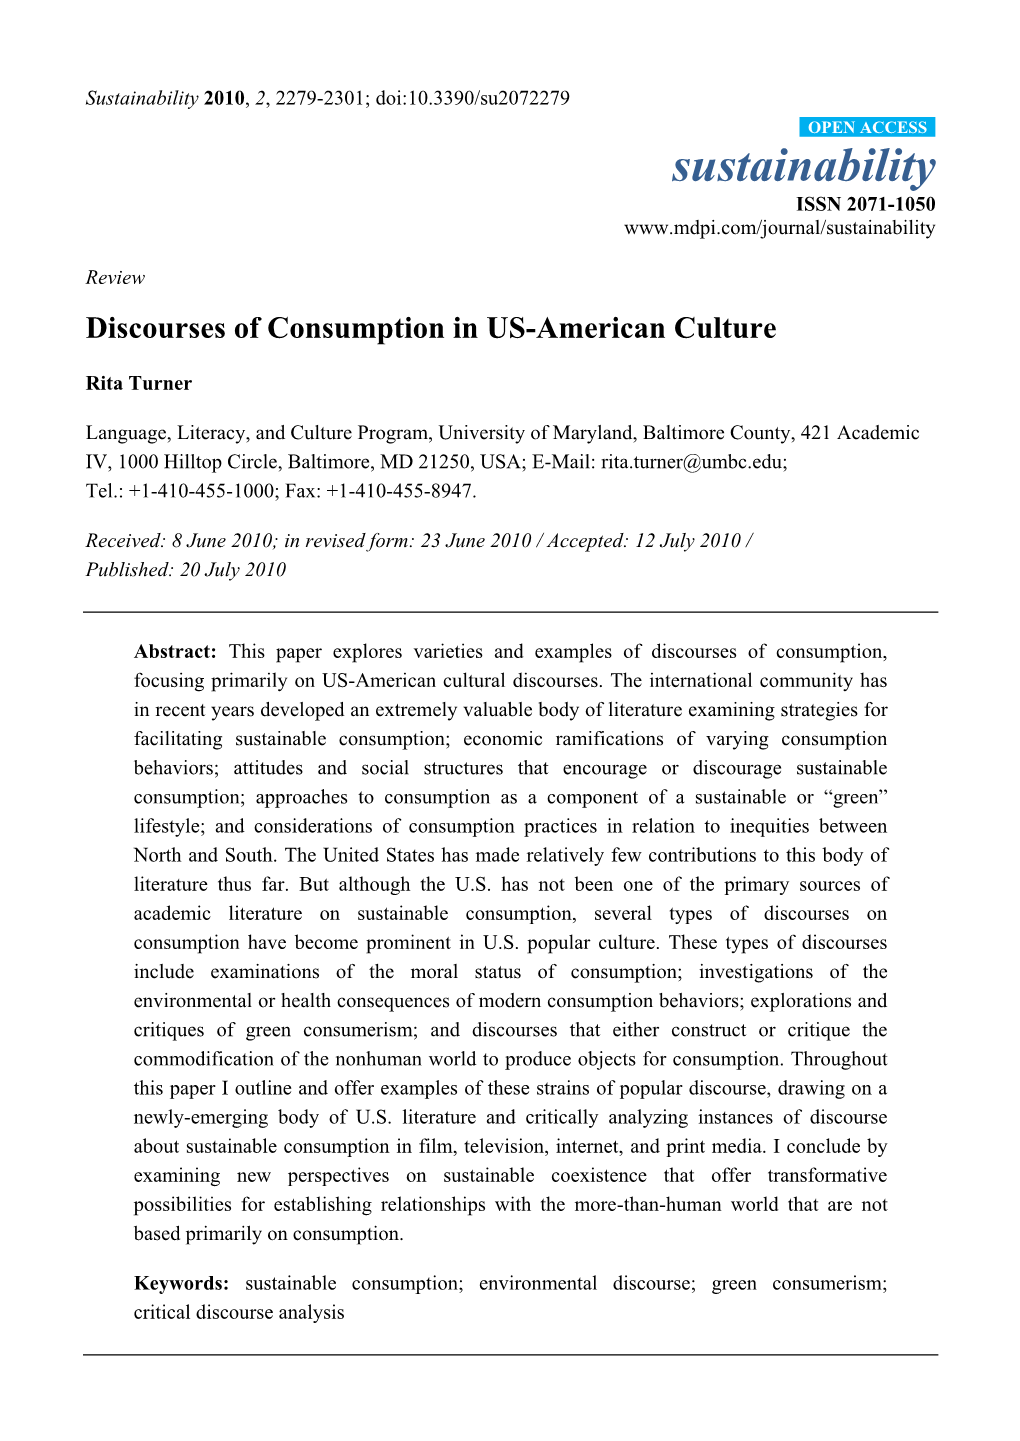 Discourses of Consumption in US-American Culture